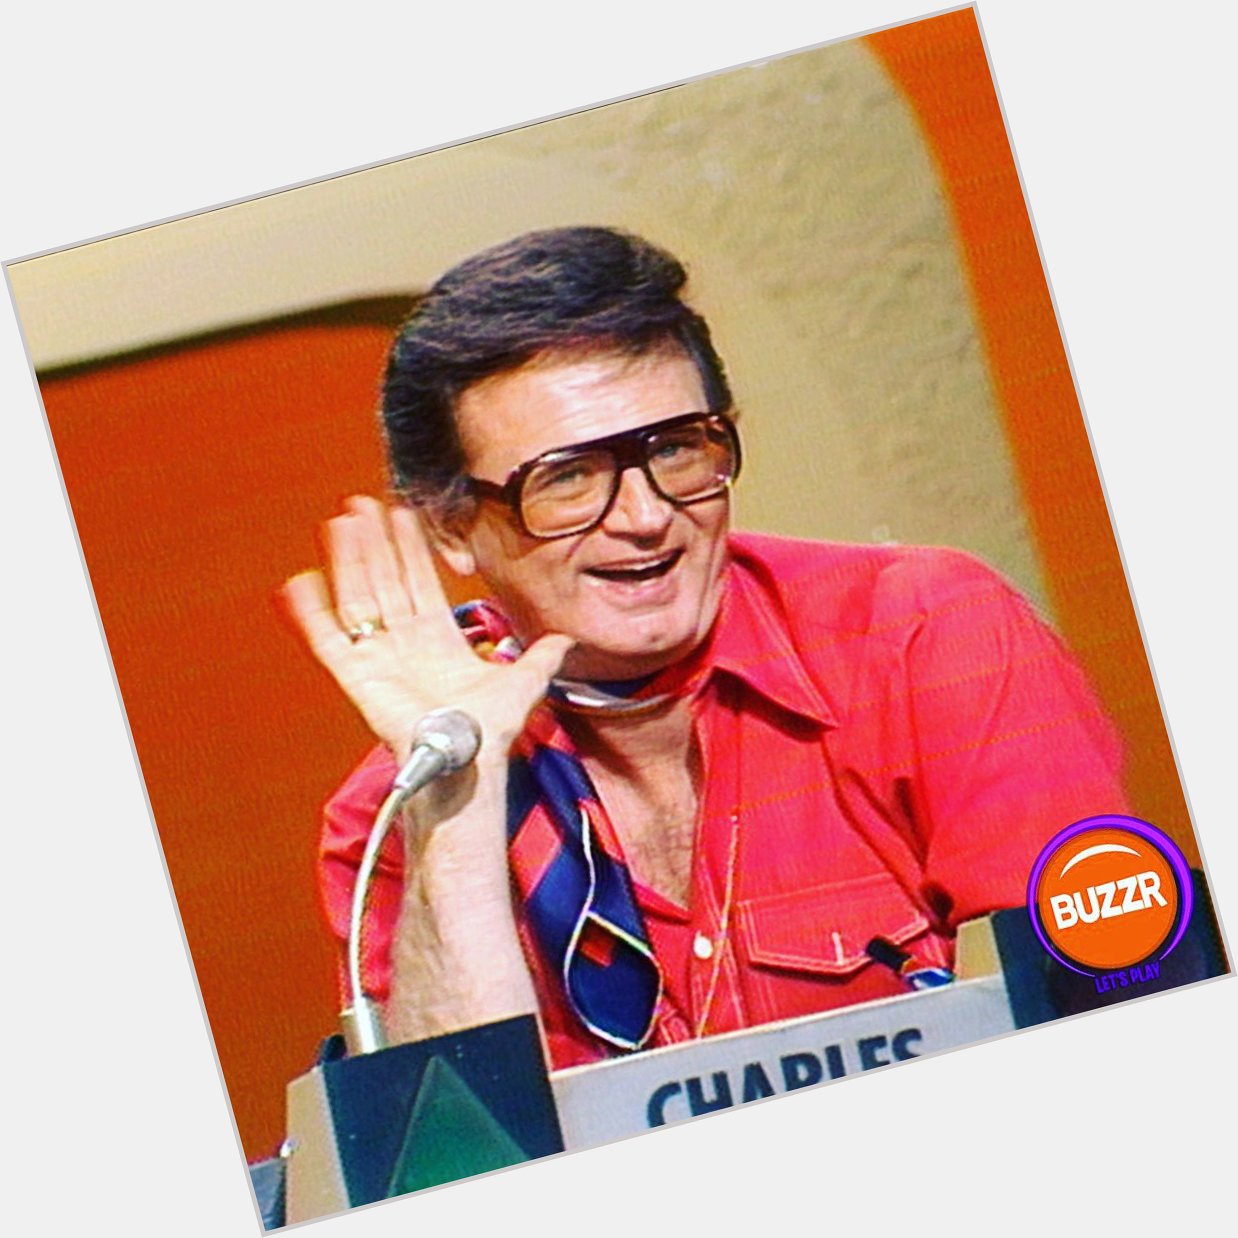 Happy Birthday to this comedic icon and legend, Mr. Charles Nelson Reilly!! Charles would ve been 88 today   